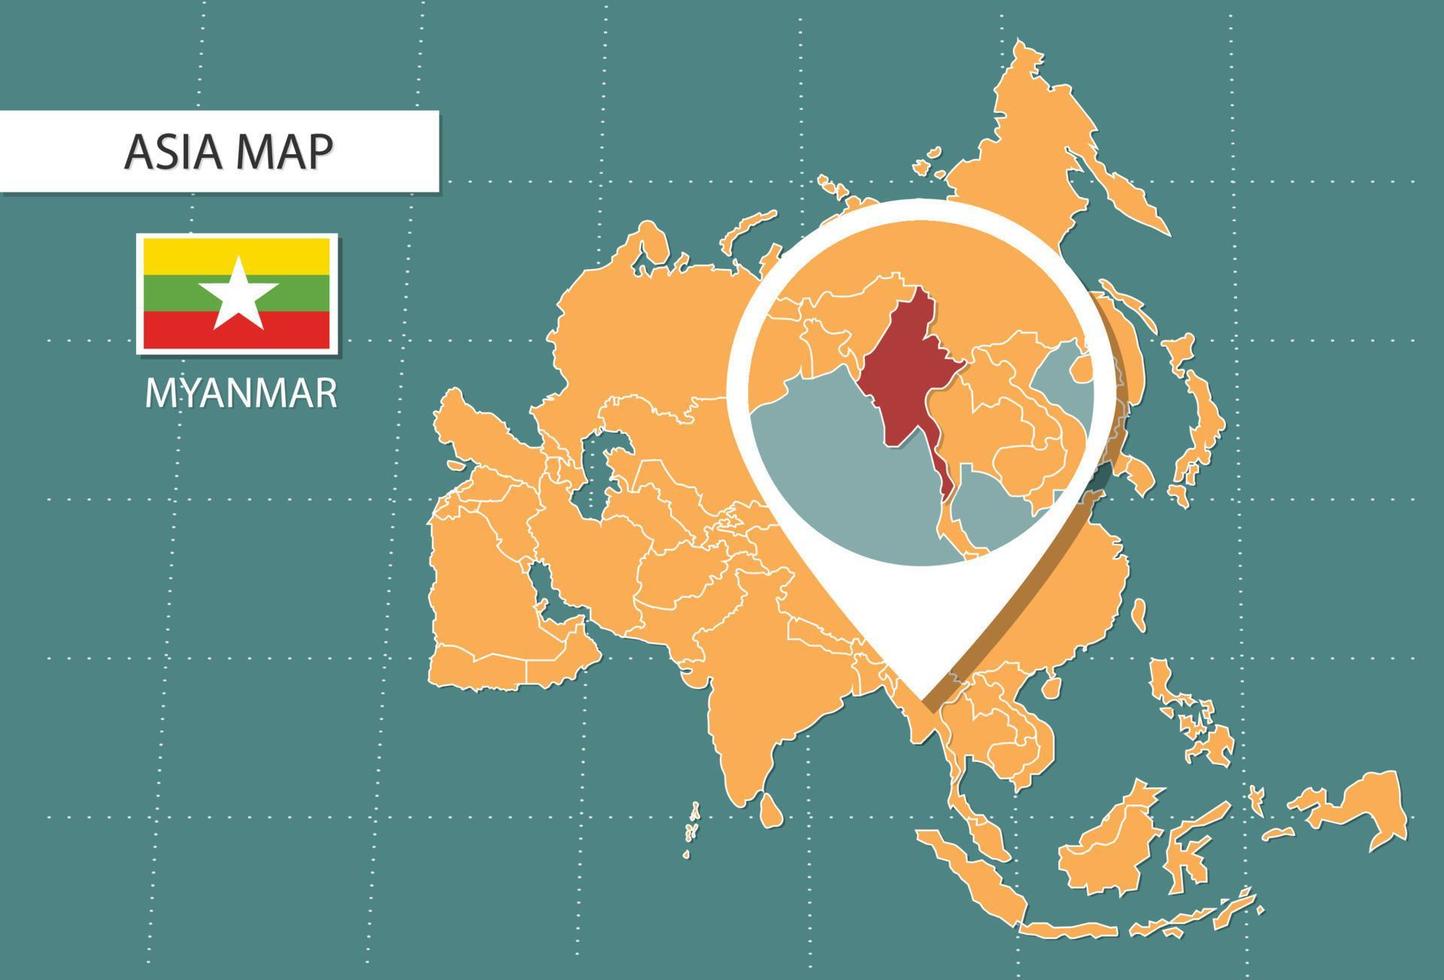 Myanmar map in Asia zoom version, icons showing Myanmar location and flags. vector